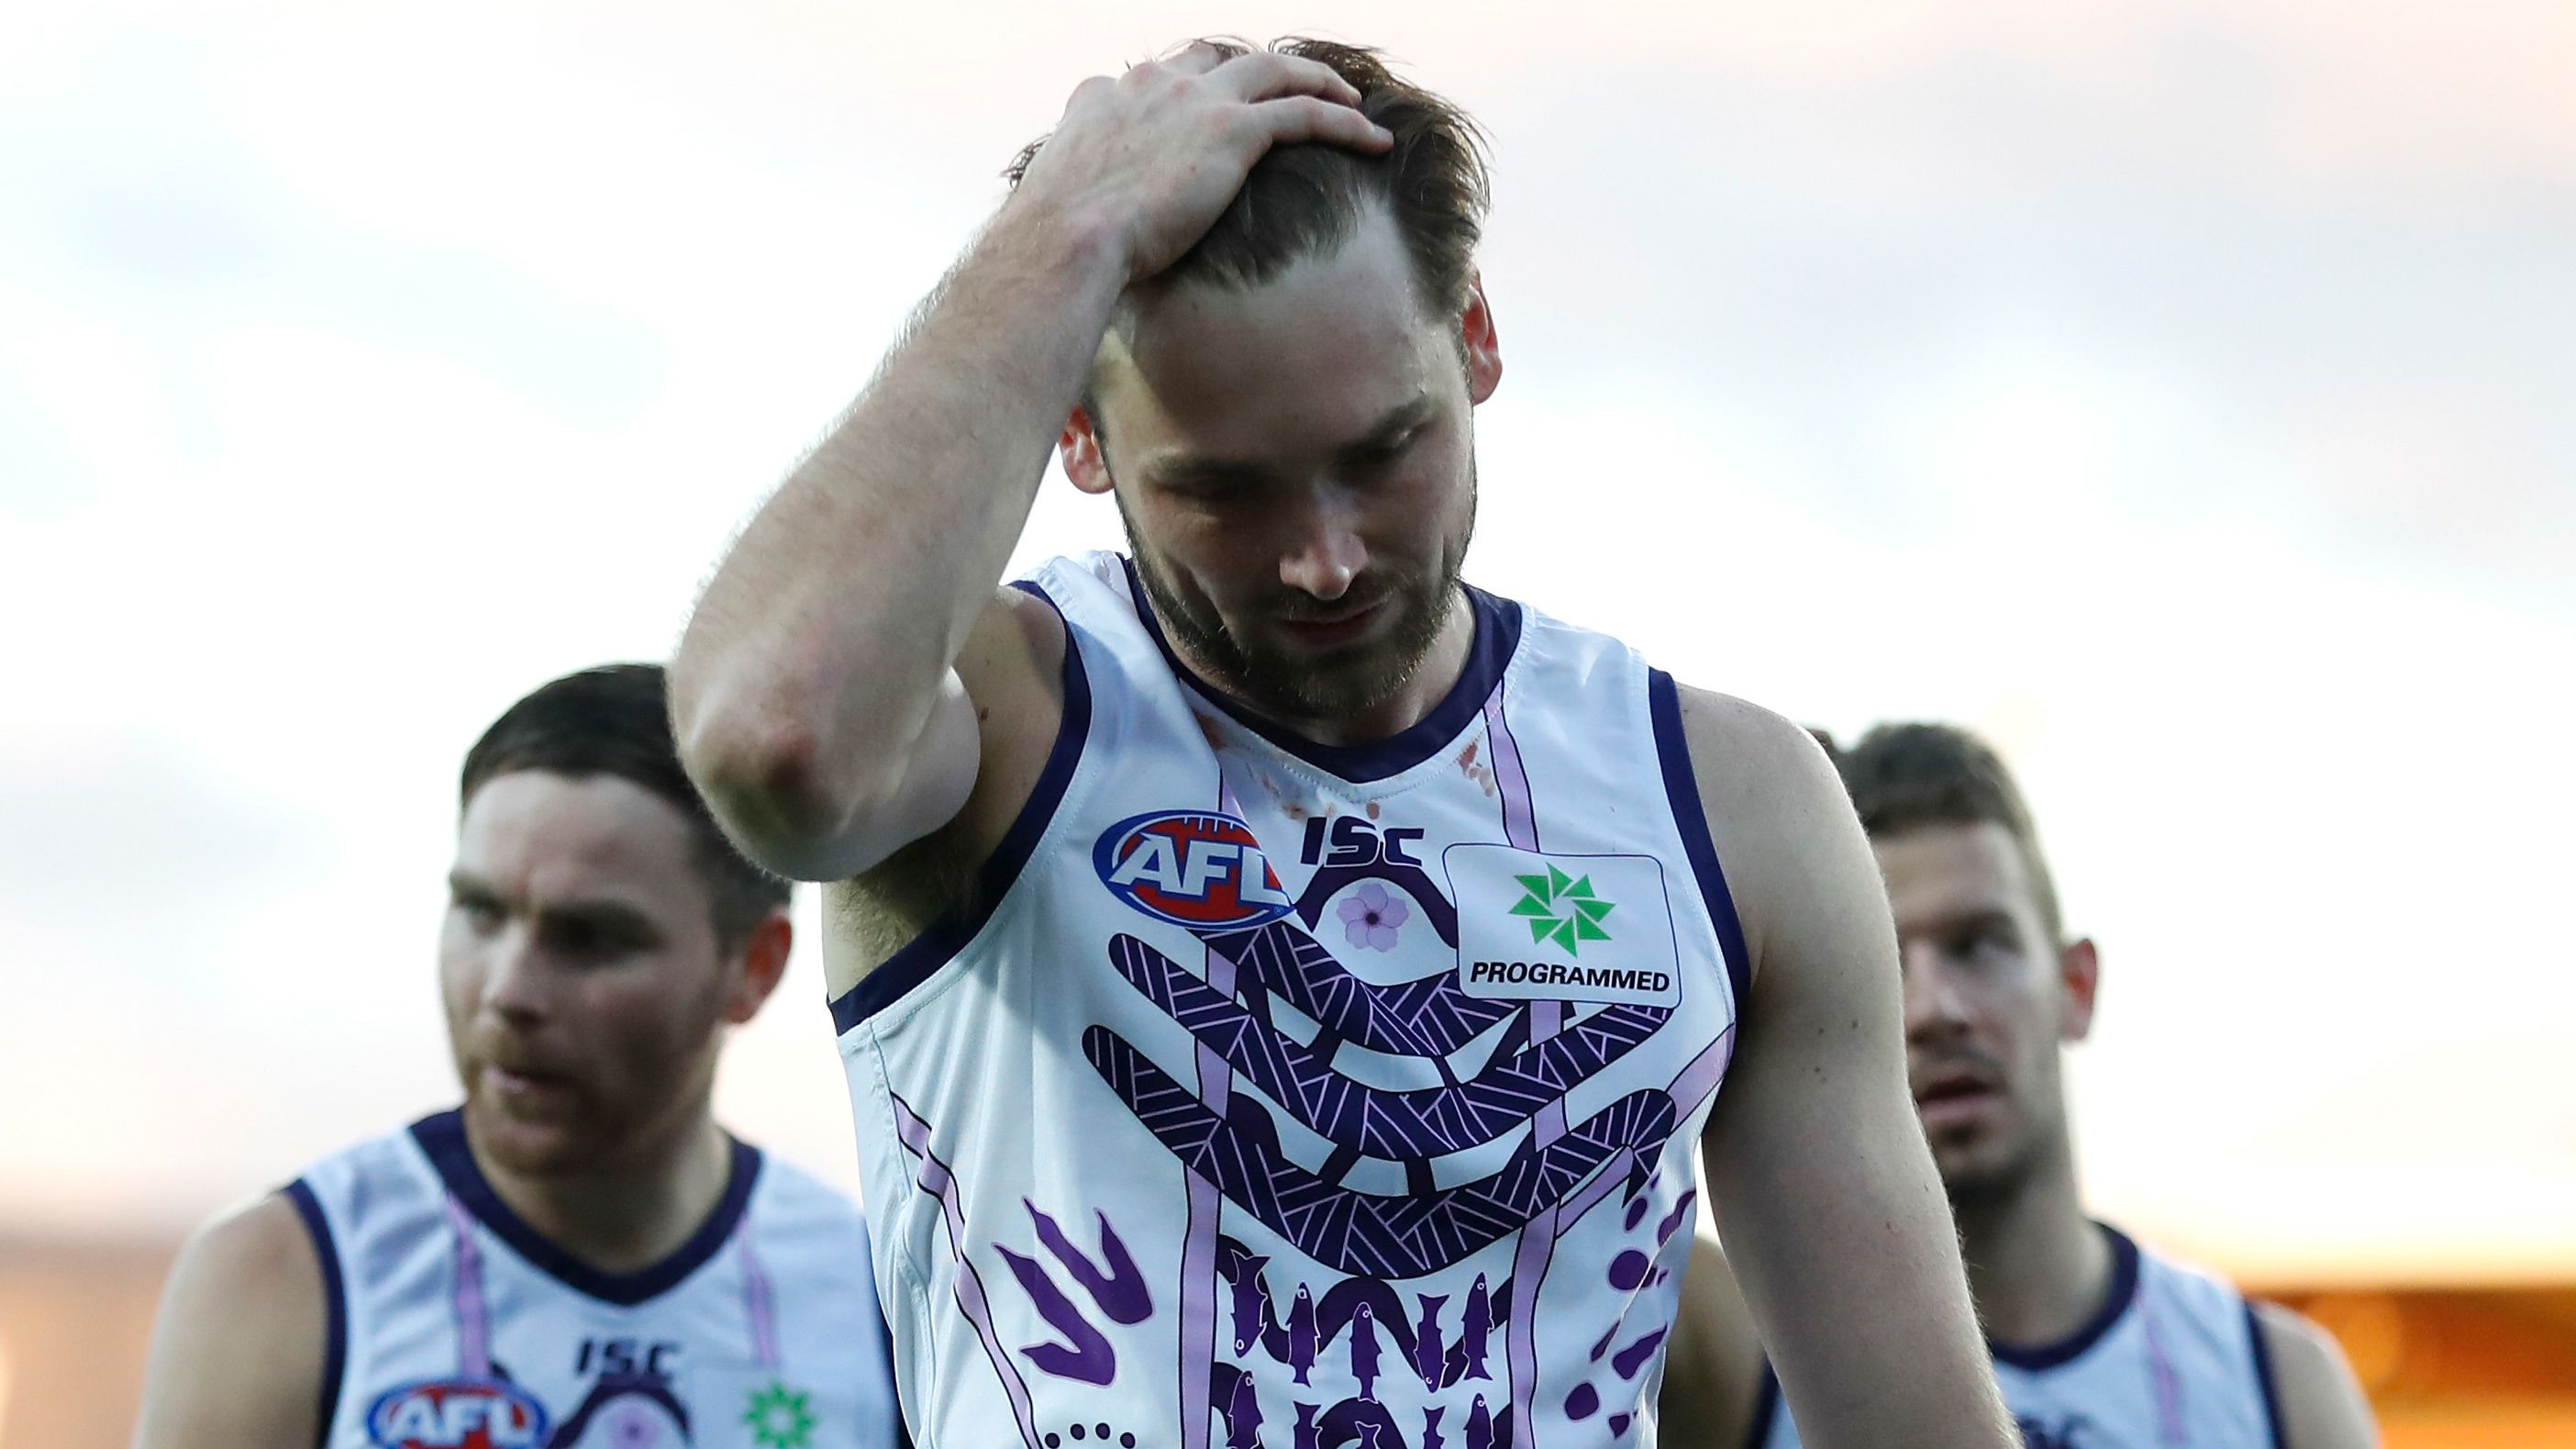 LAUNCESTON, AUSTRALIA - JULY 13: Joel Hamling of the Dockers looks dejected after a loss during the 2019 AFL round 17 match between the Hawthorn Hawks and the Fremantle Dockers at UTAS Stadium on July 13, 2019 in Launceston, Australia. (Photo by Michael Willson/AFL Photos)